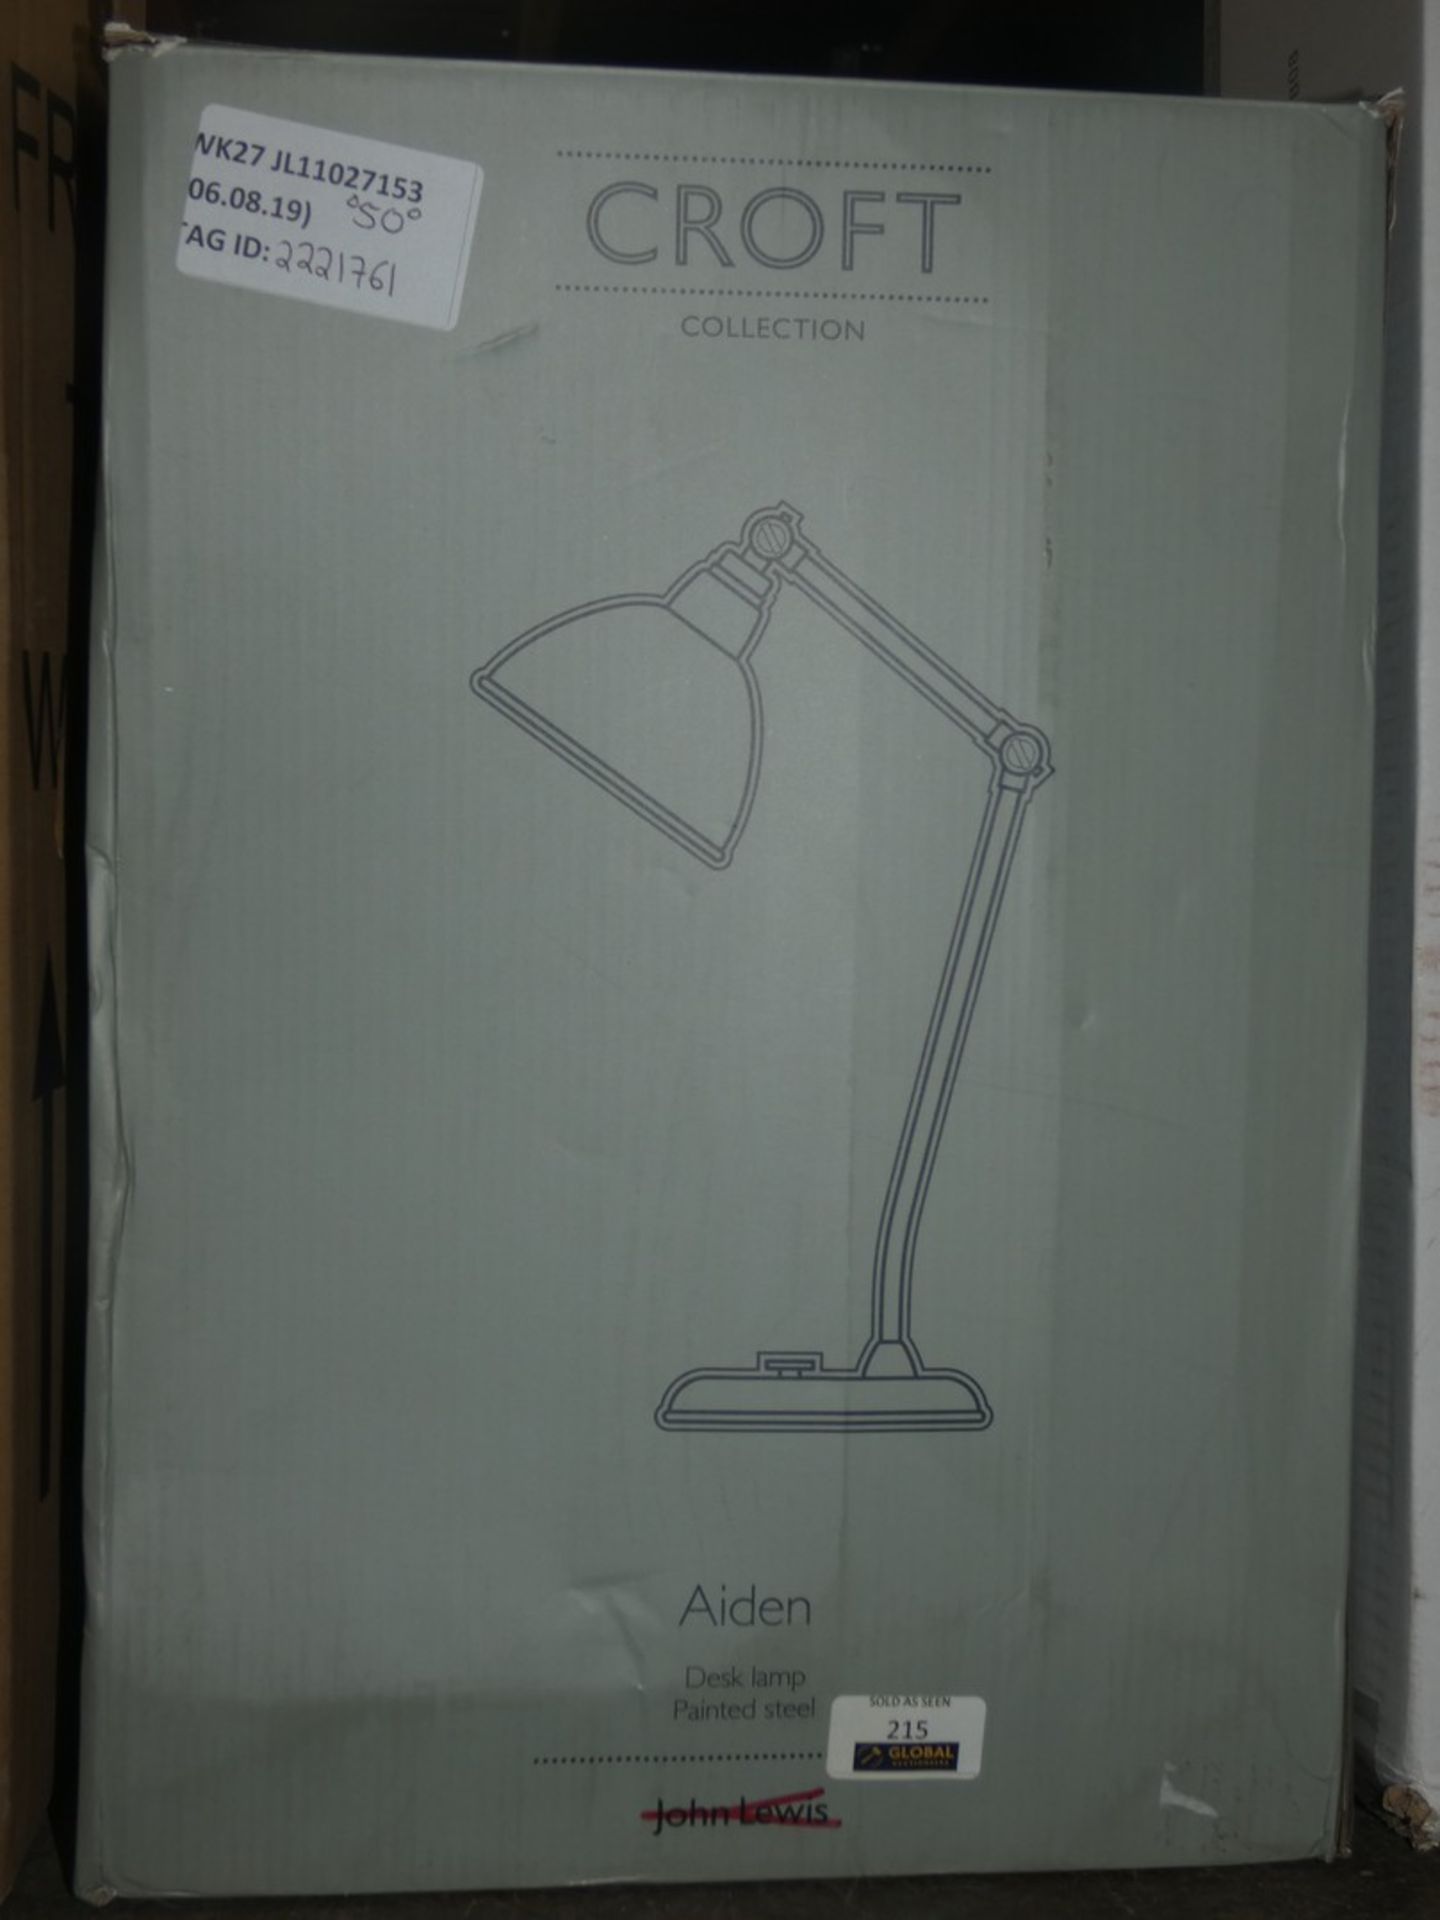 Boxed John Lewis Croft Collection Aidan Desk Lamp RRP £50 (2221761) (Viewings And Appraisals Are